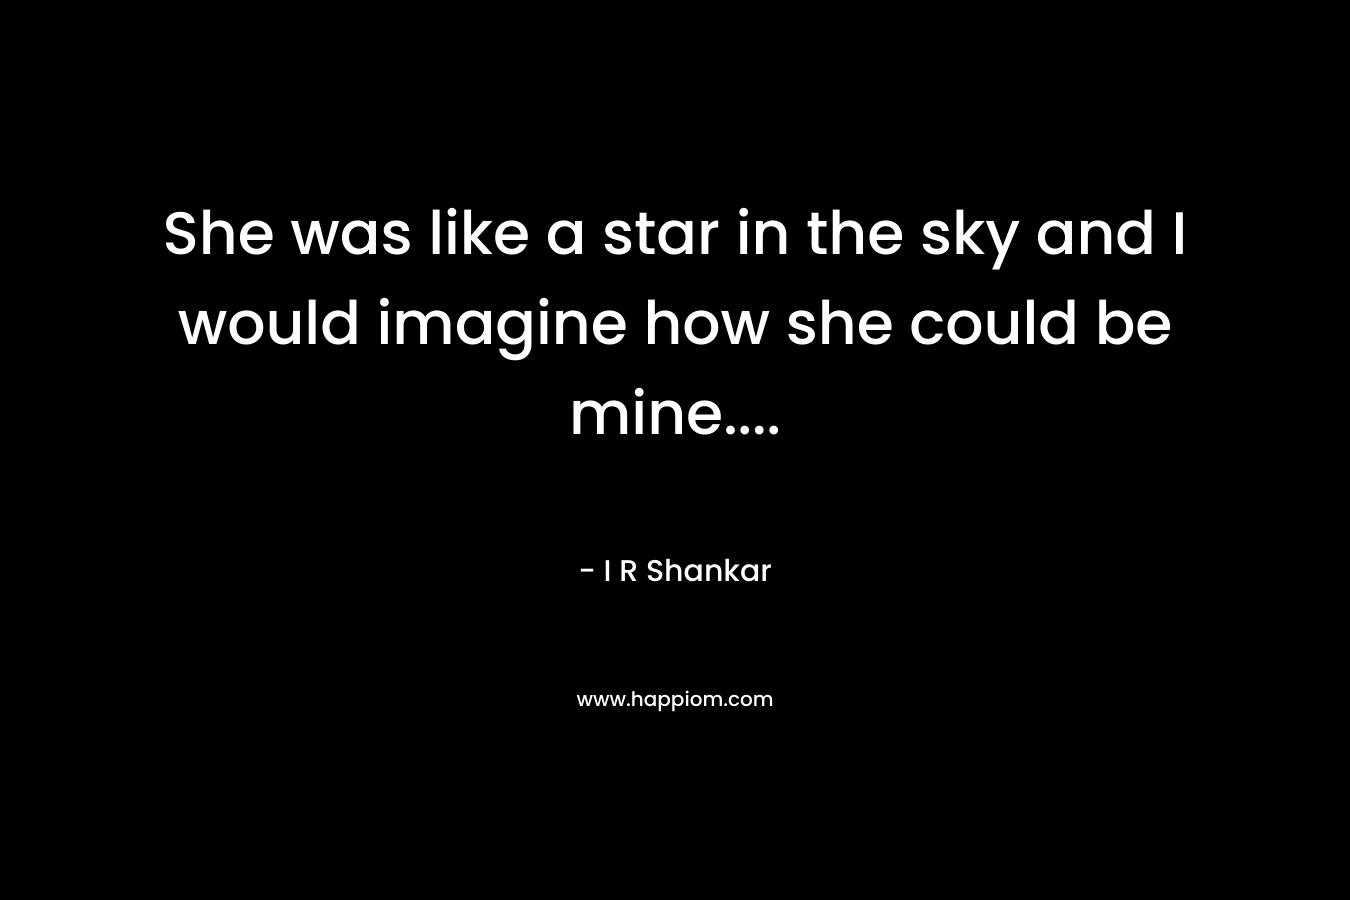 She was like a star in the sky and I would imagine how she could be mine....